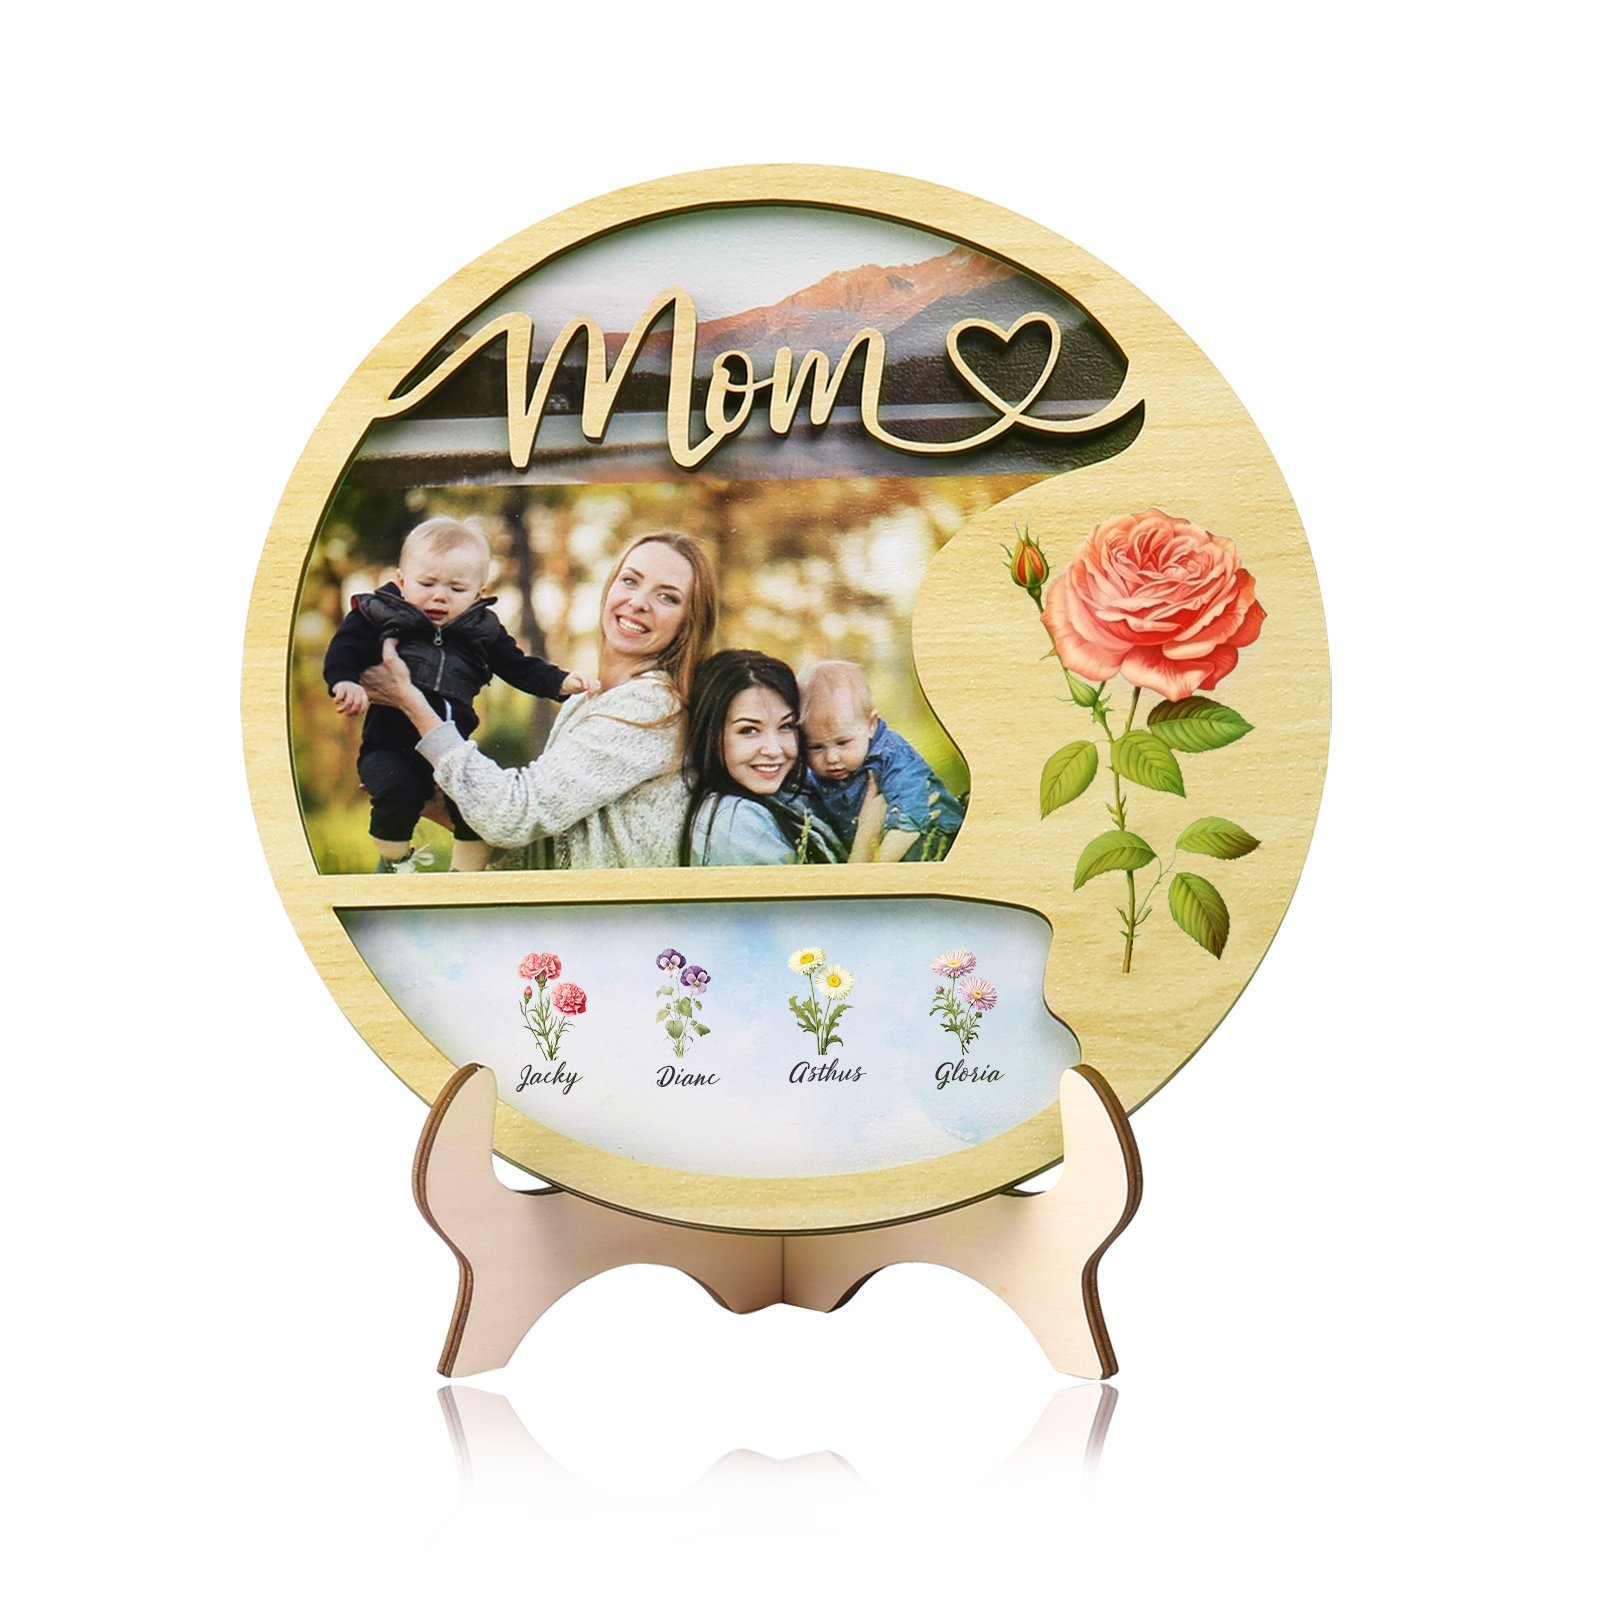 4 Names - Customized Photo Birthday Flowers and Text Wooden Ornaments for Mom/Grandma